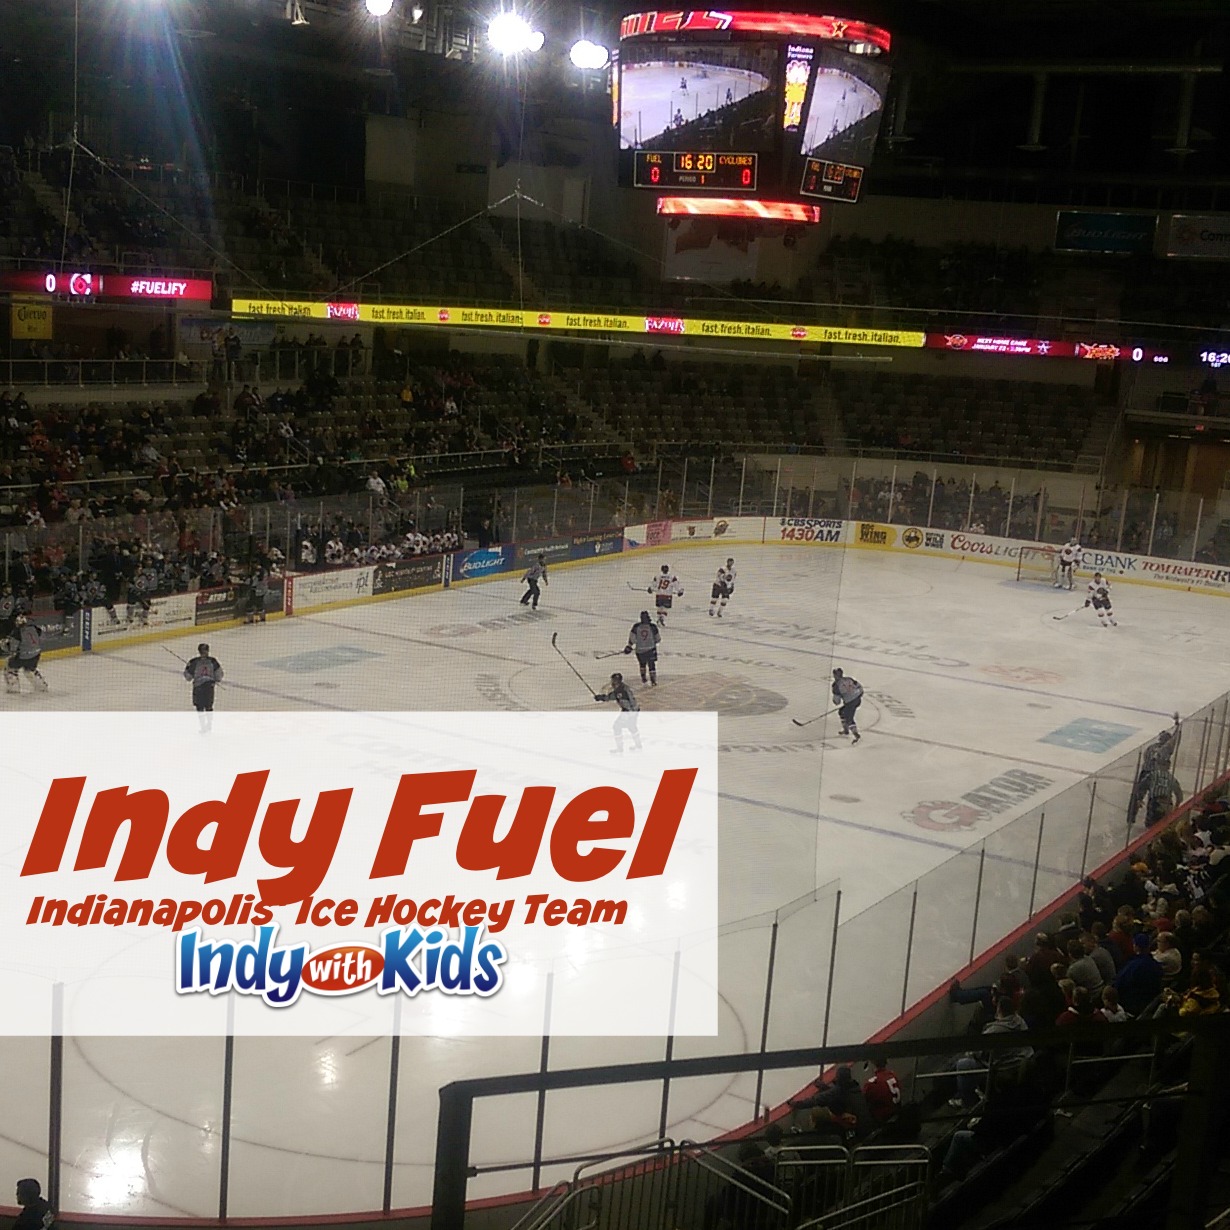 Indy Fuel Ice Hockey Team Farmer's Coliseum Fairgrounds Indy with Kids